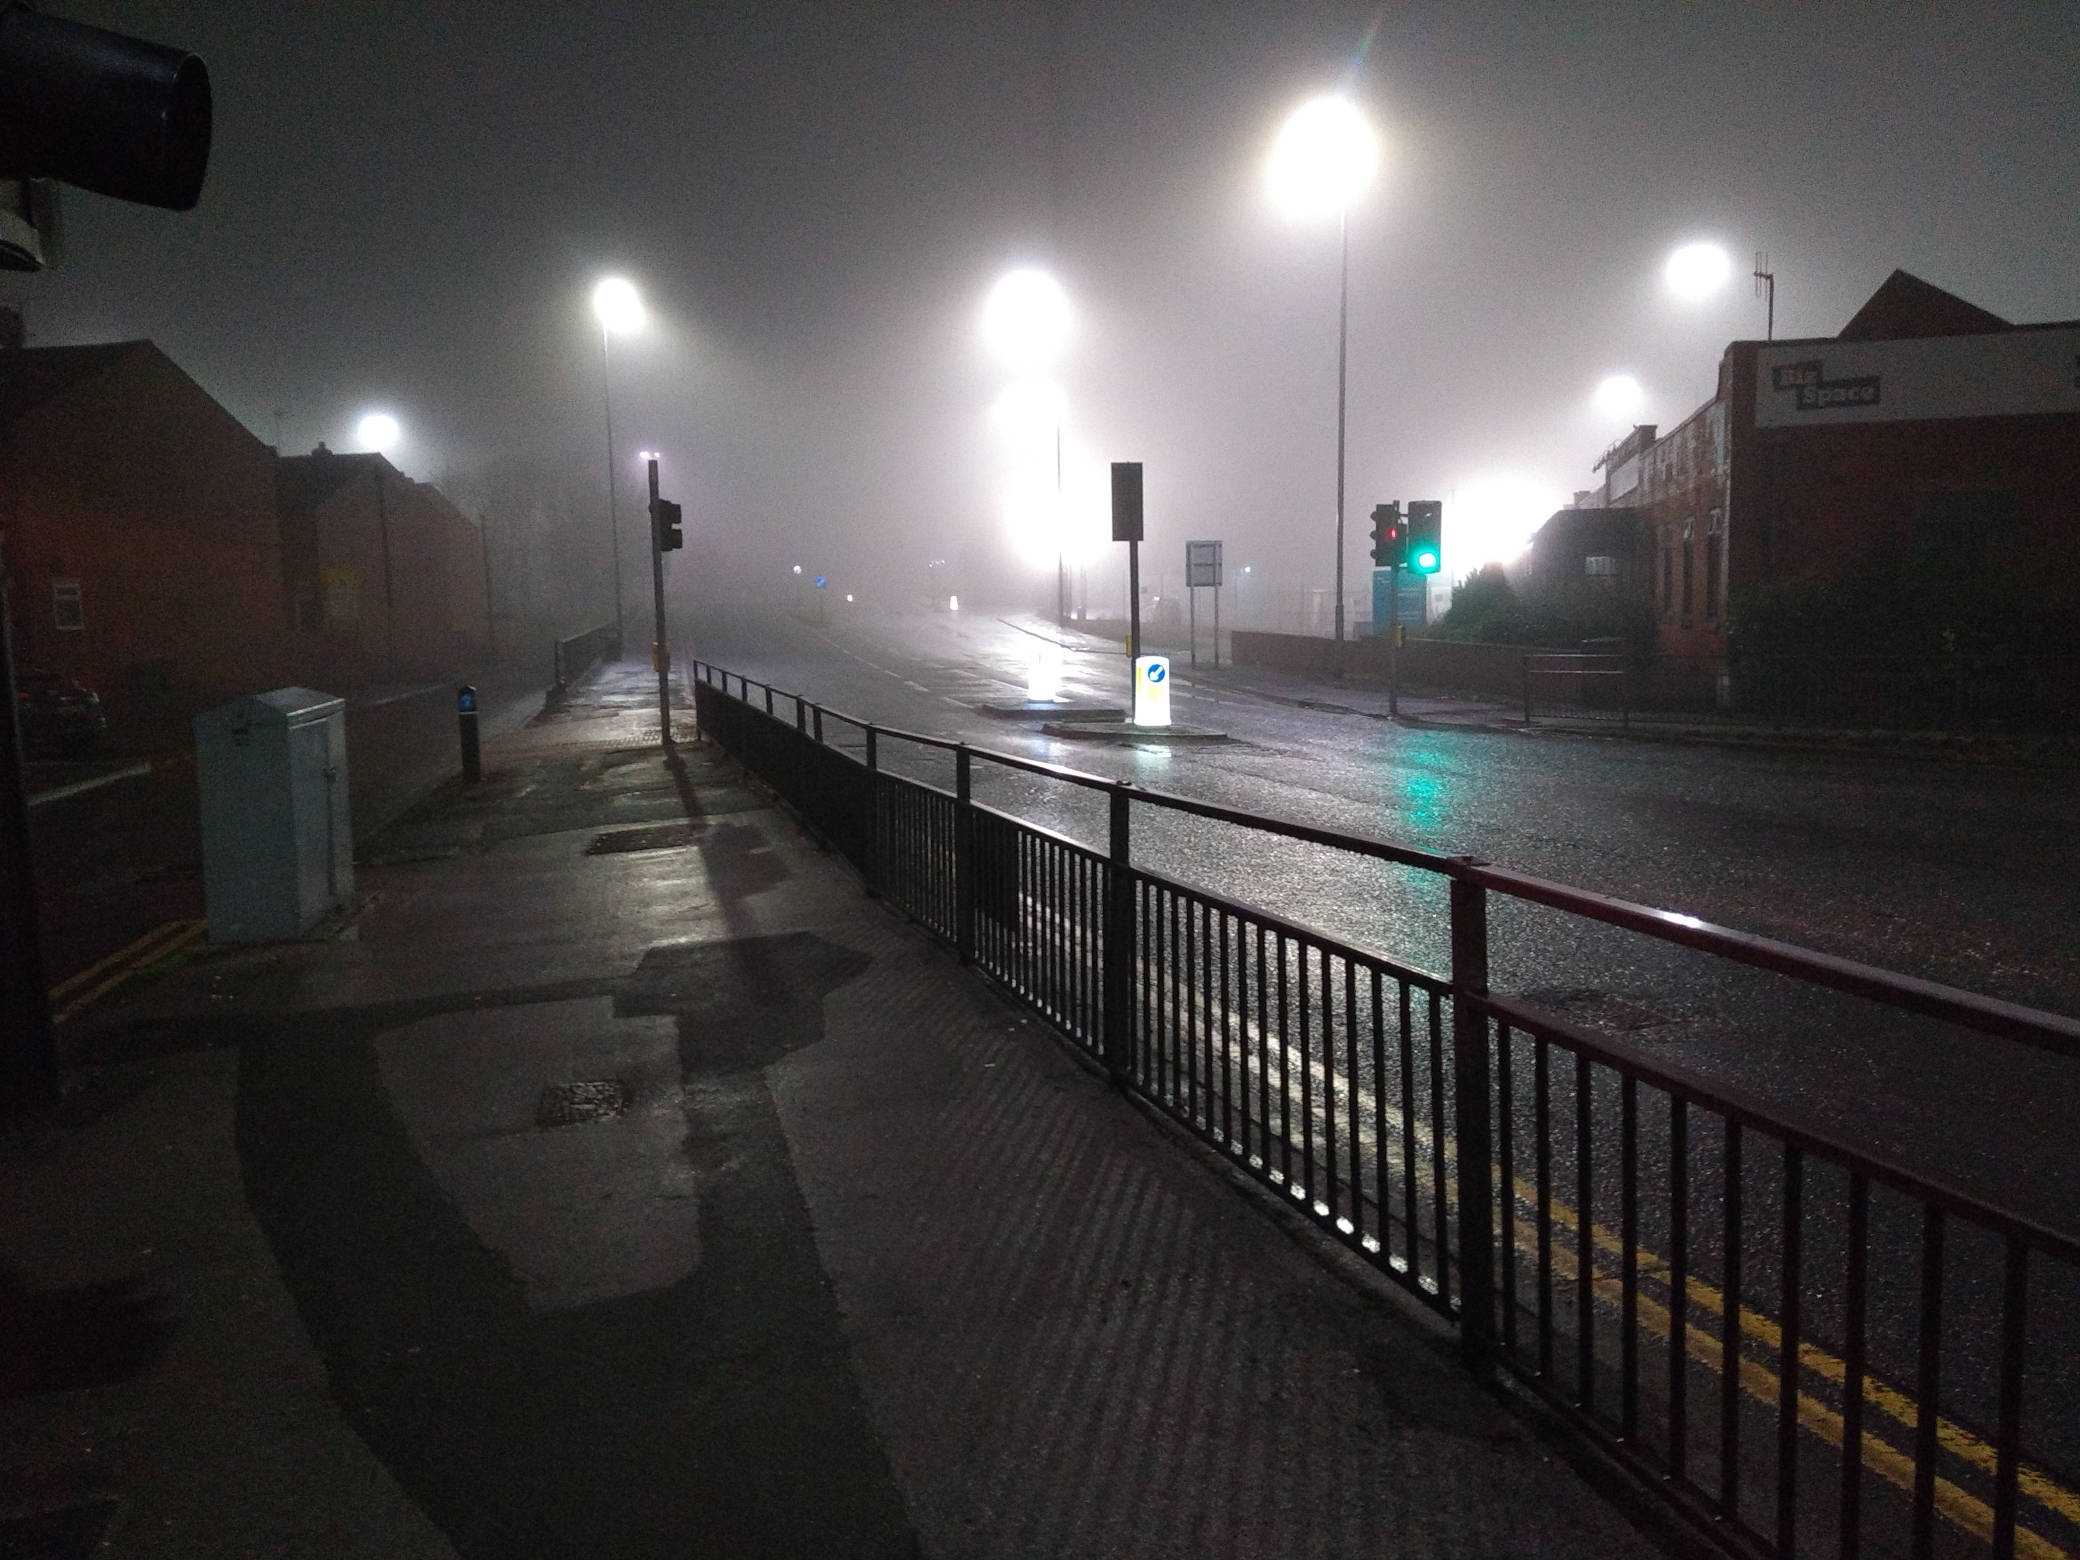 
    Looking along a completely empty major street at night. The street lights are over exposed creating
    big glowing blobs of light. The street fades into the mist in the distance.